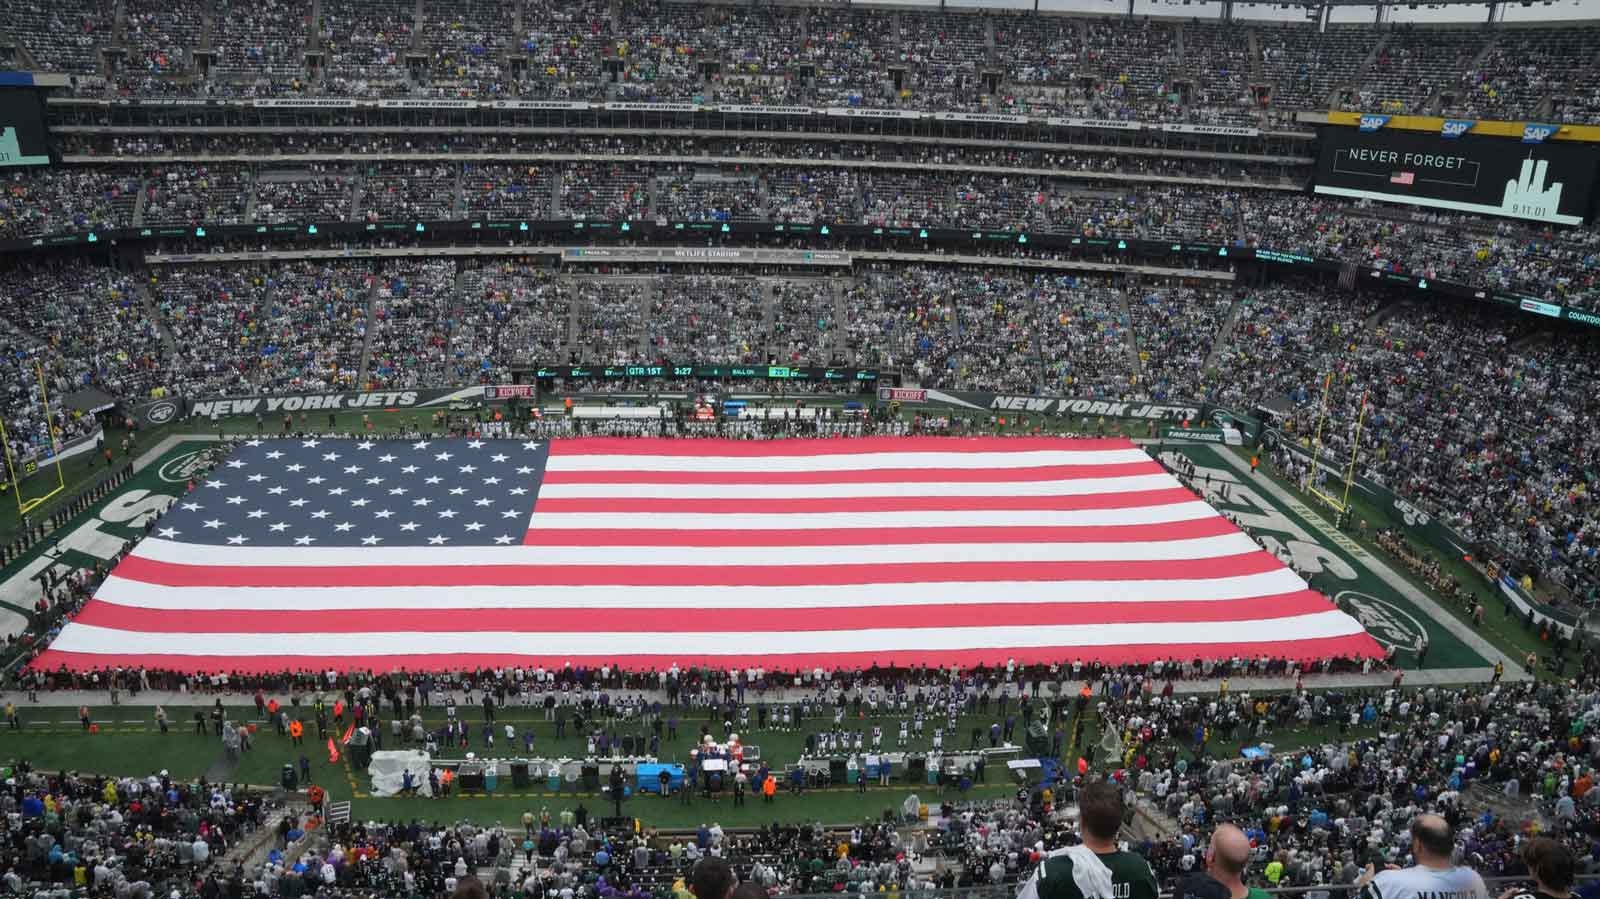 Teams around the NFL tweeted messages honoring the victims, survivors and first responders of the 9/11 terrorist attacks, including a particularly emotional national anthem at Metlife Stadium as the Jets hosted the Ravens.